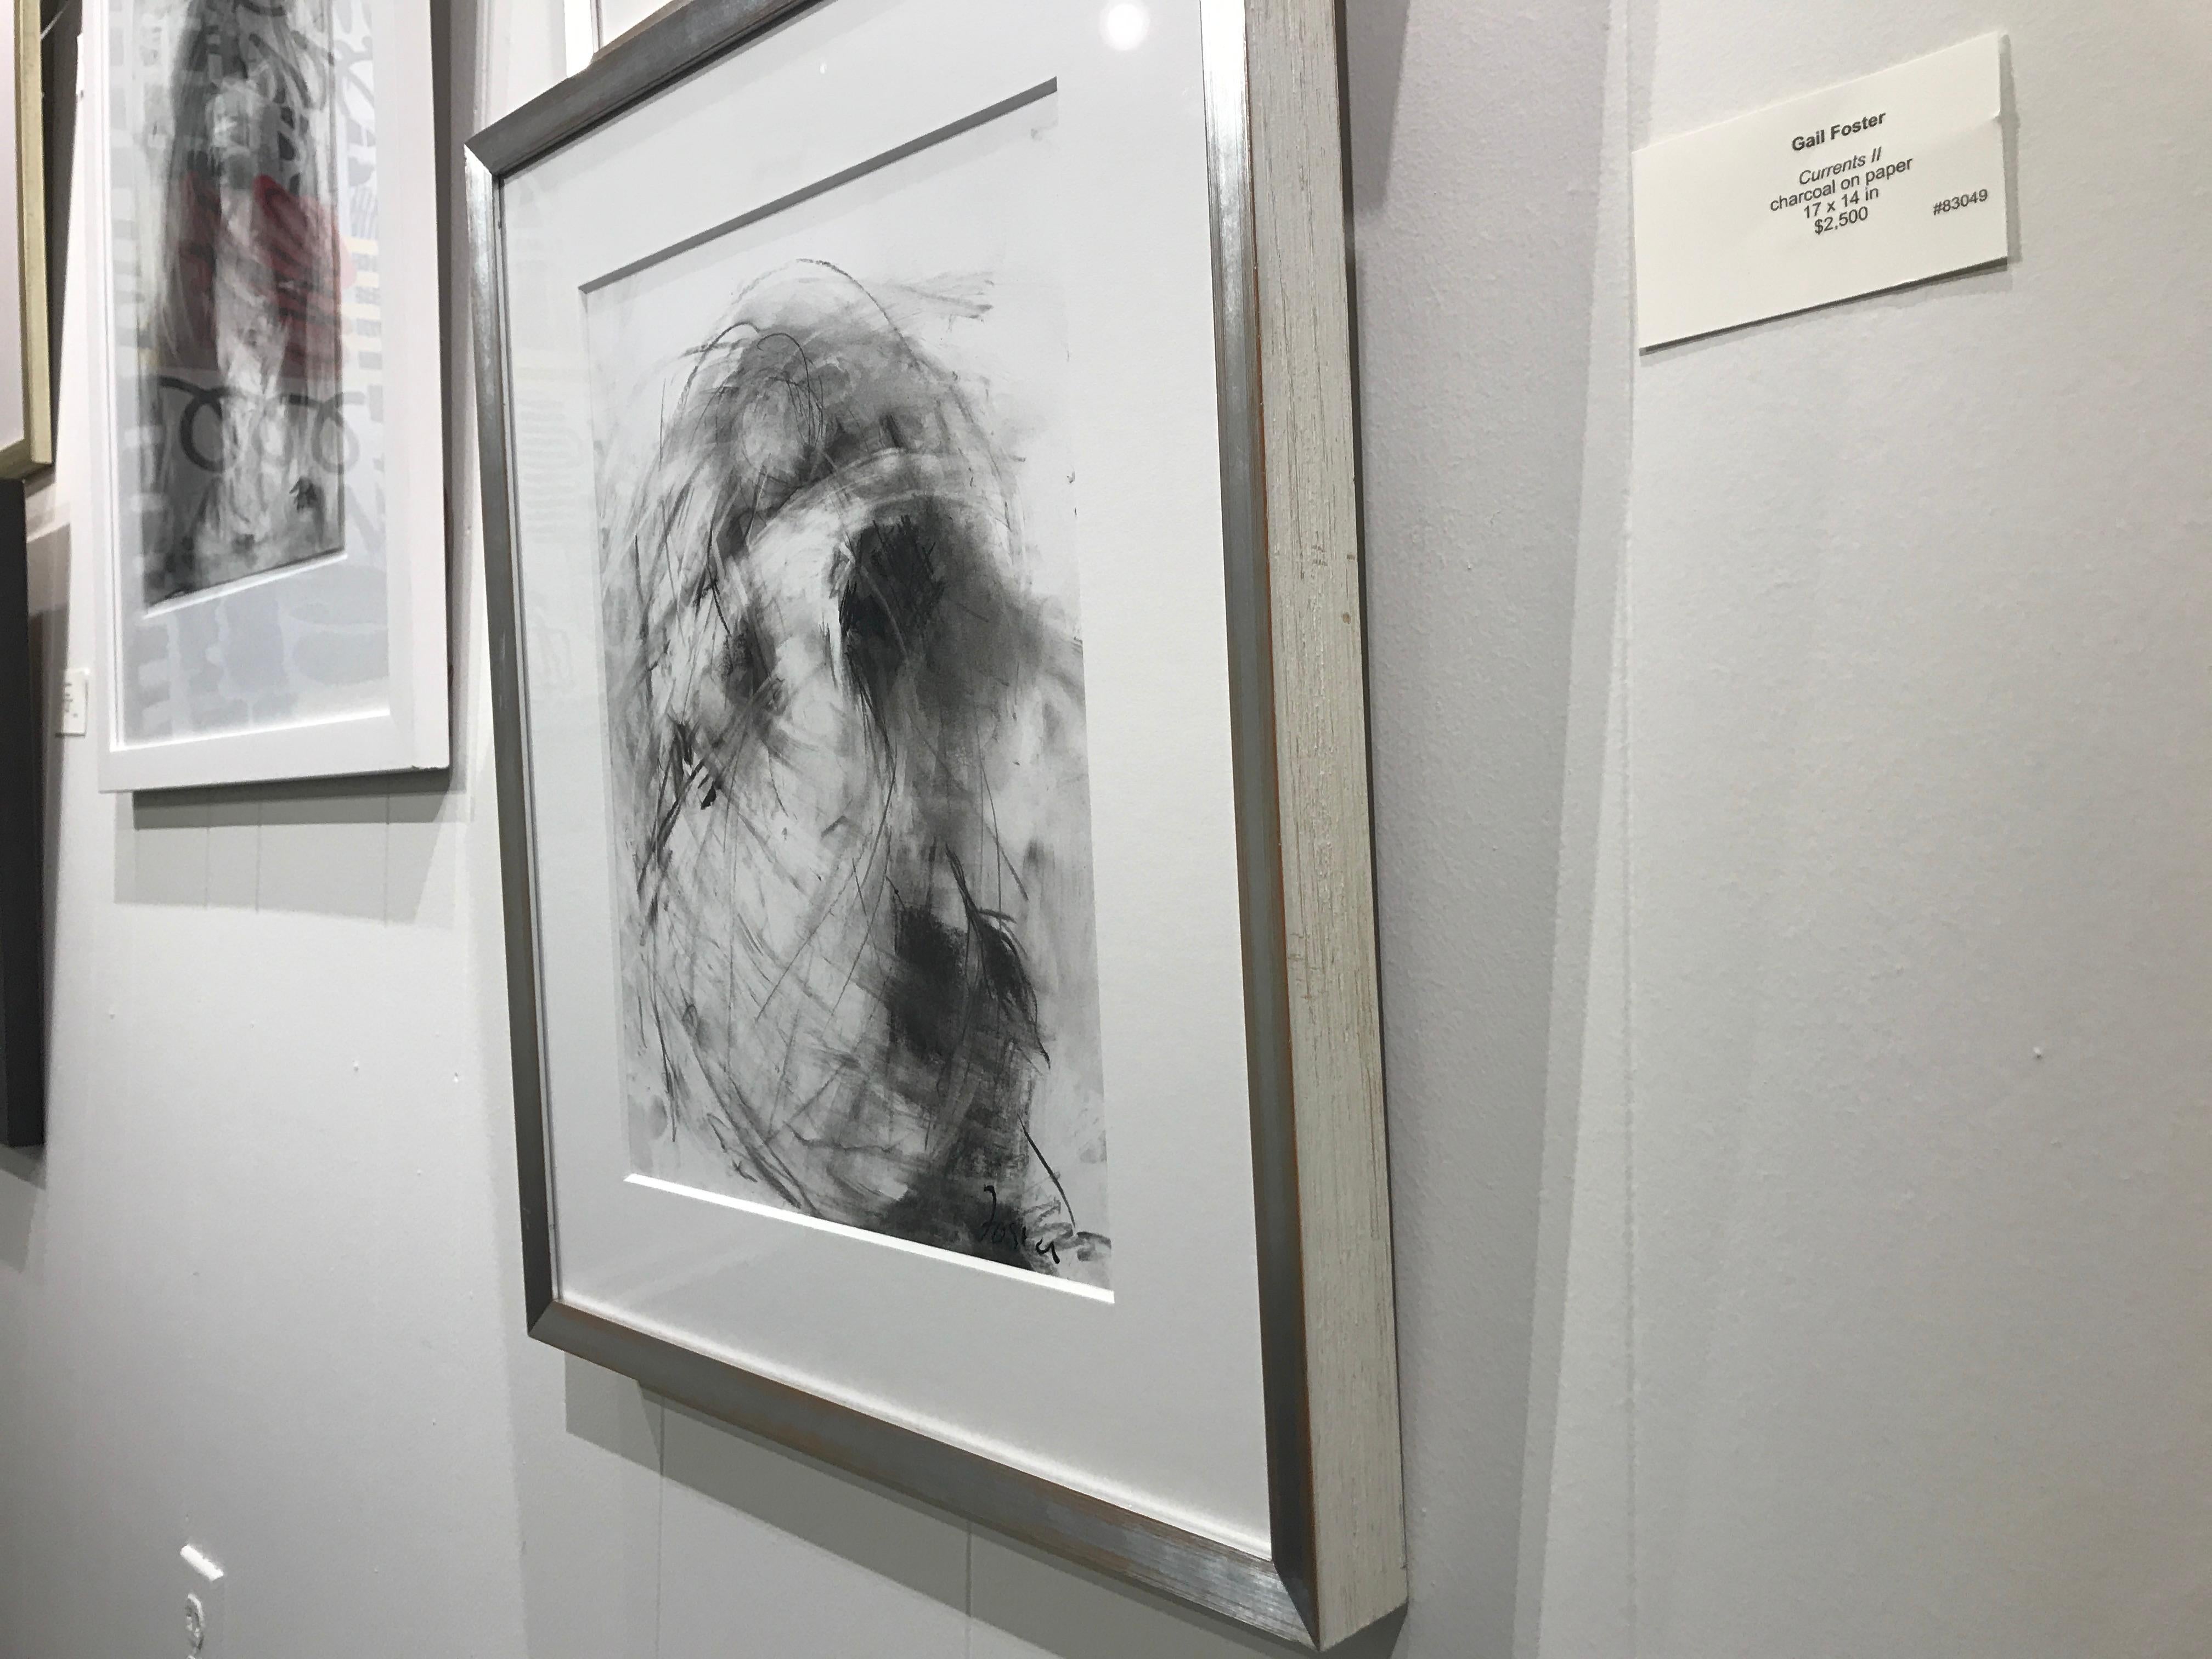 Currents II by Gail Foster 2018 Petite Framed Charcoal on Paper Figurative 5